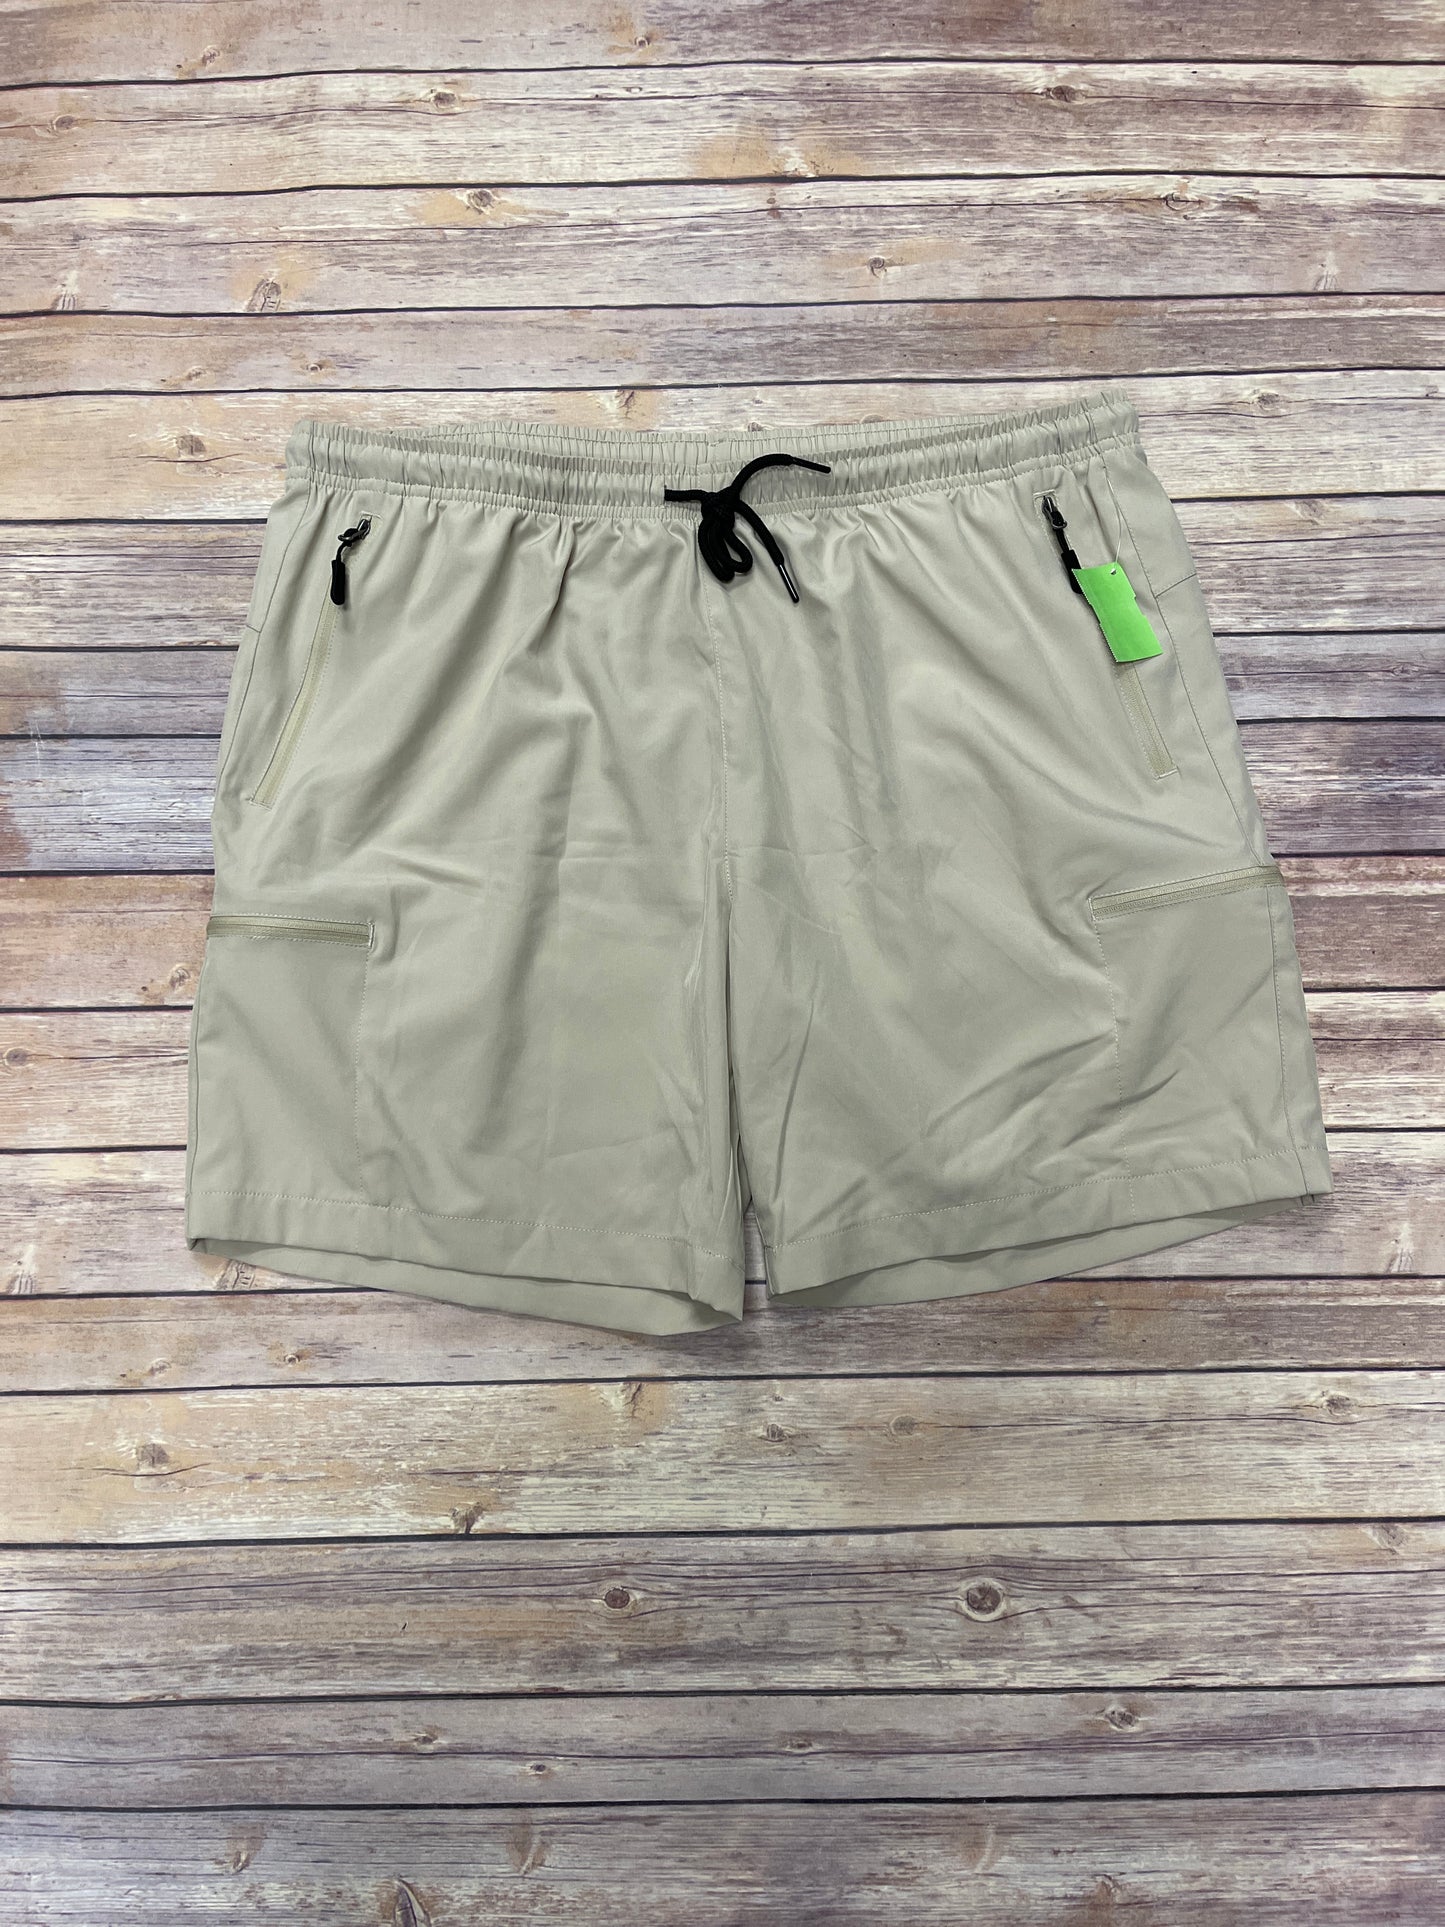 Athletic Shorts By Cme  Size: Xxl